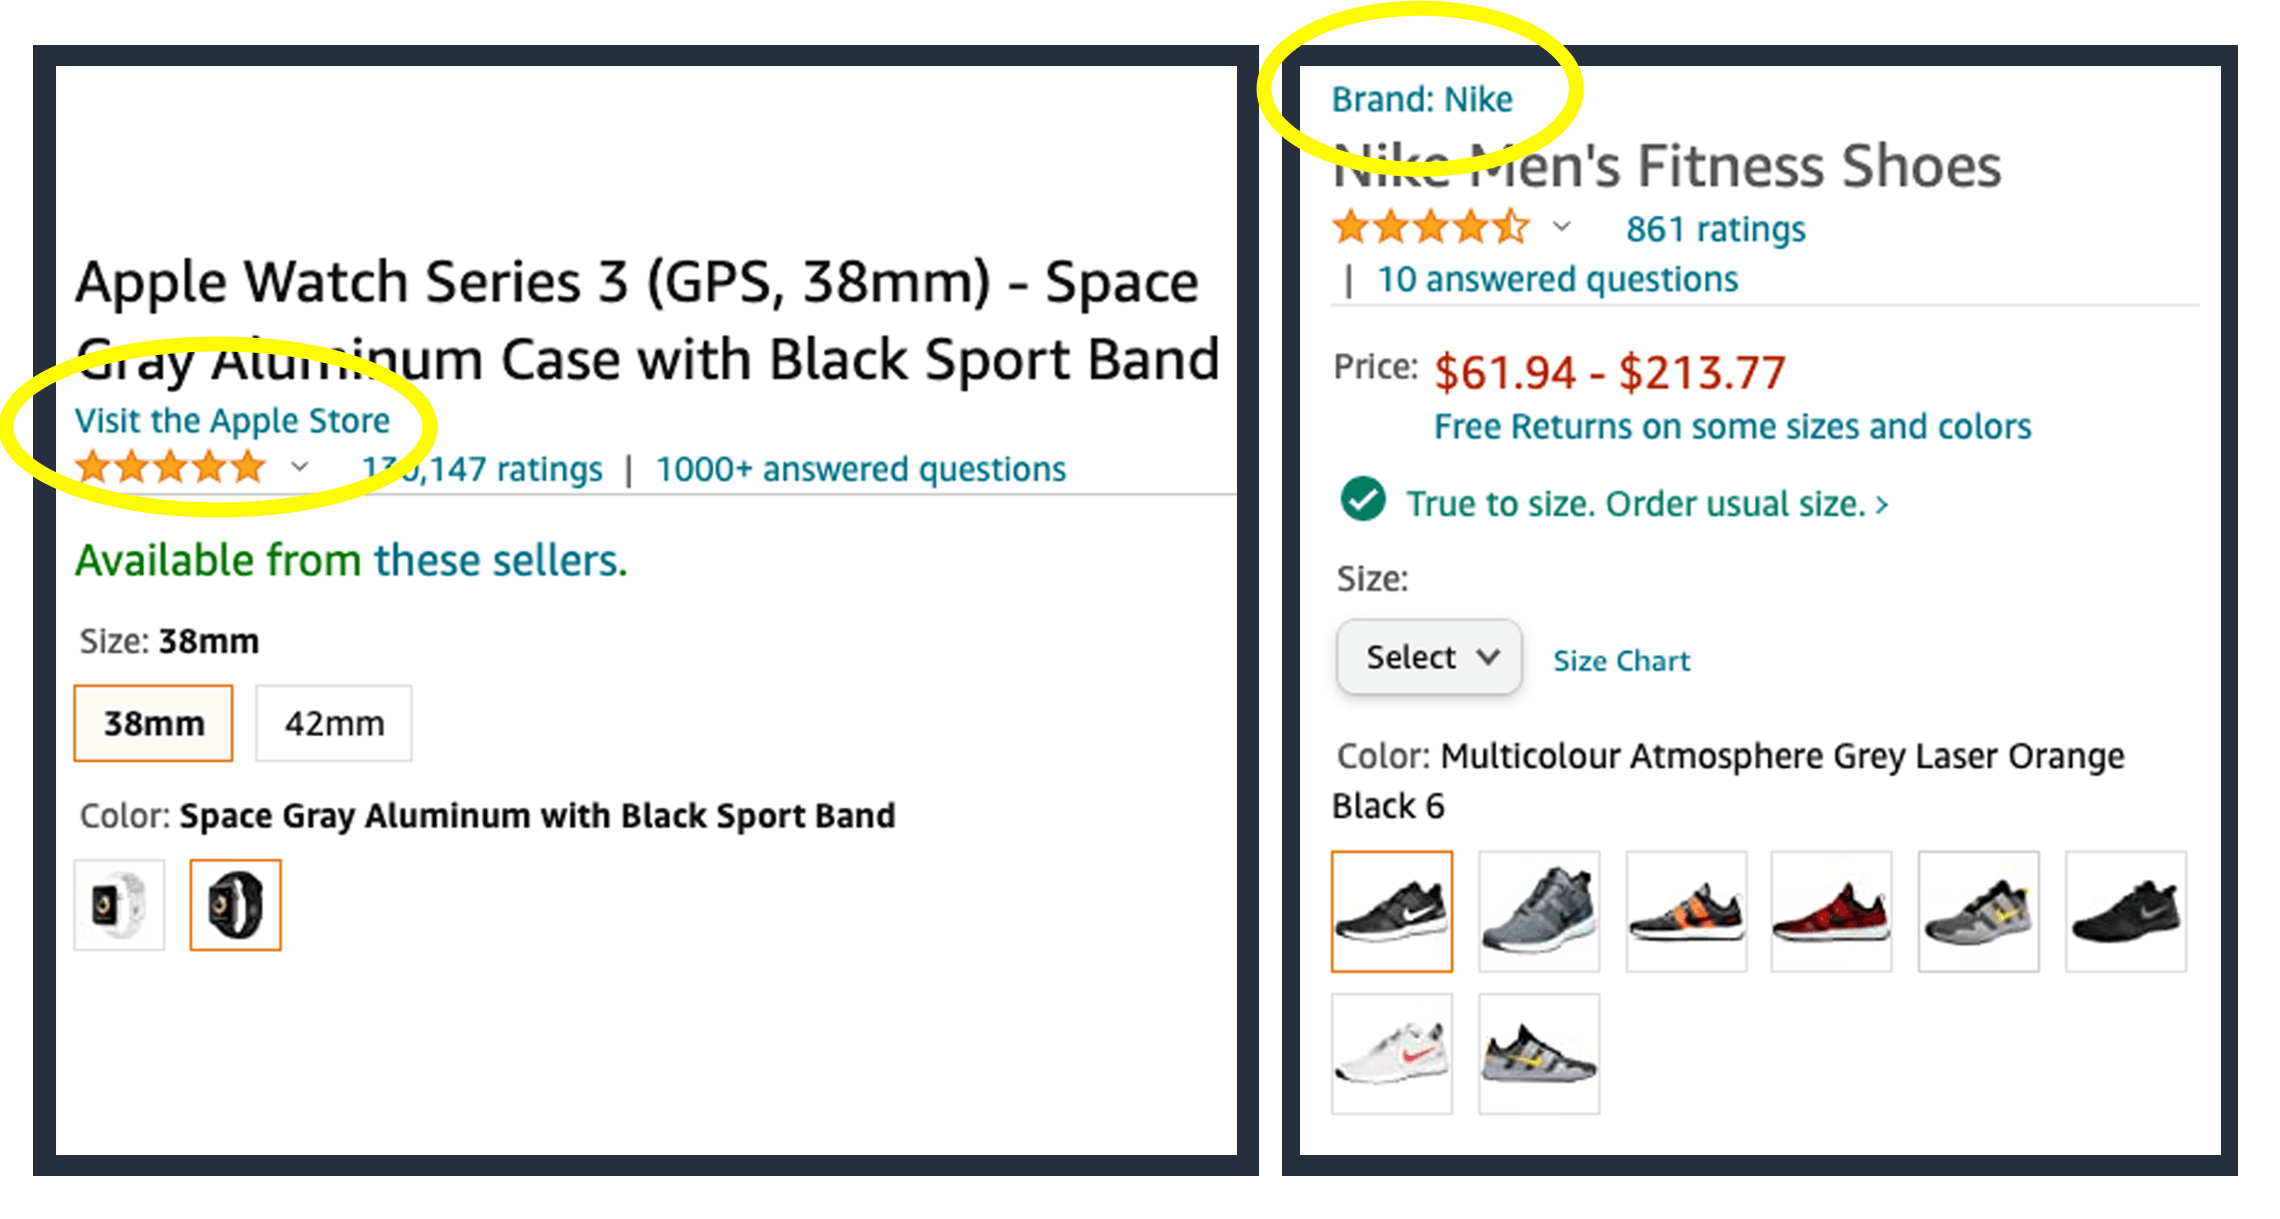 Two screenshots from amazon.com, one for Nike brand shoes and one for an Apple watches.